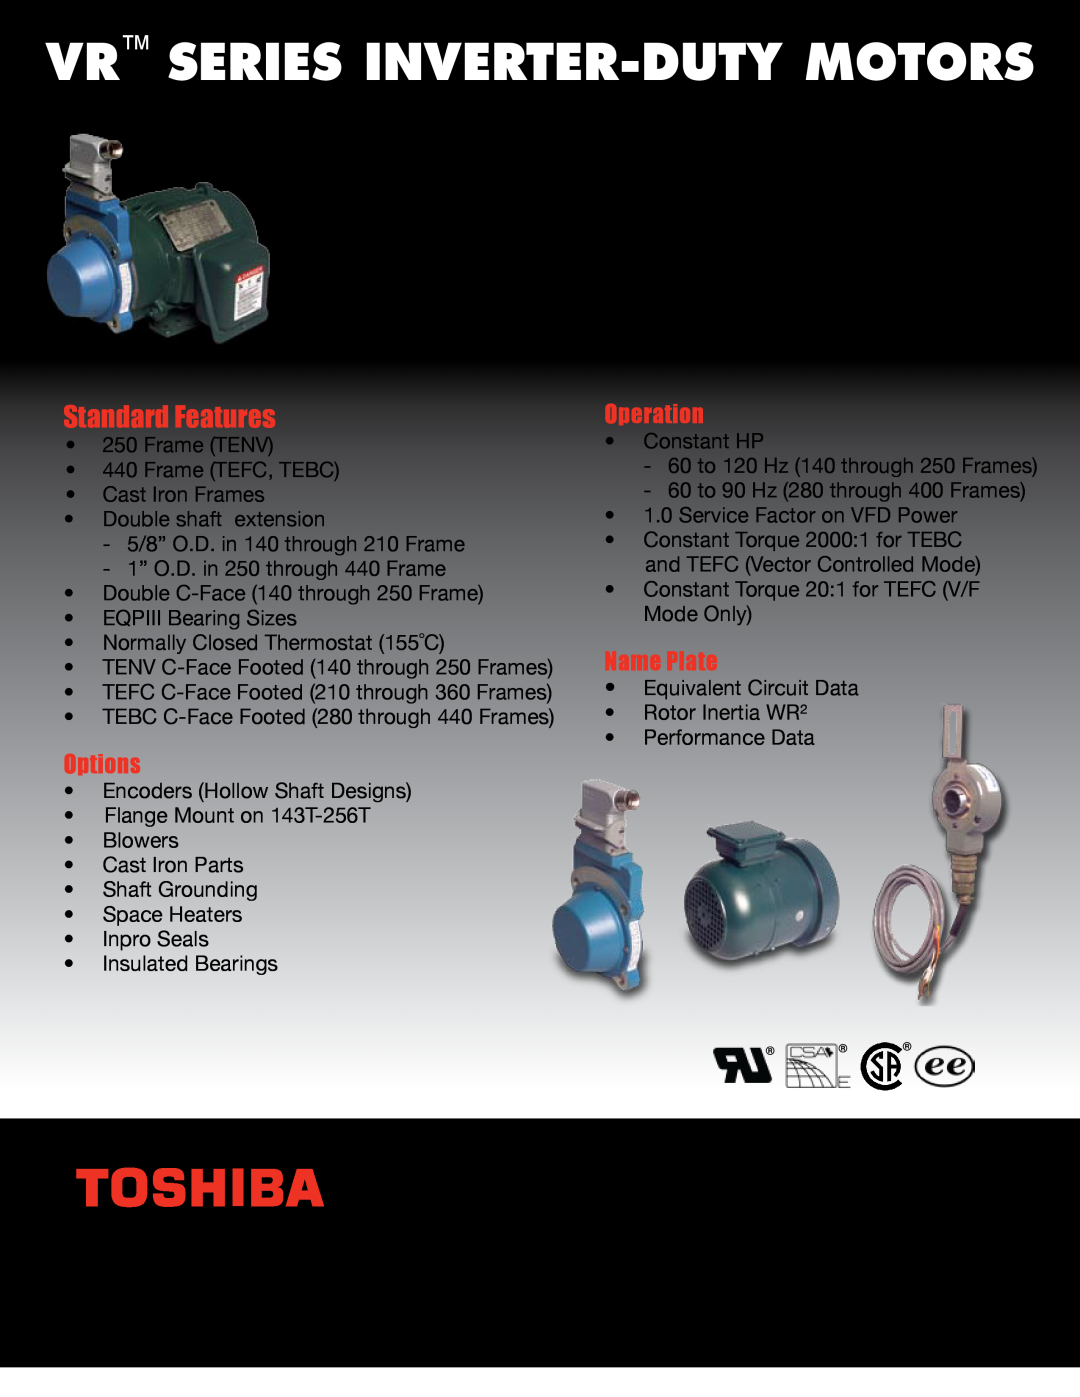 Toshiba warranty VR Series Inverter-duty Motors, LVMCTEPCT080210, Standard Features, Options, Operation, Name Plate 